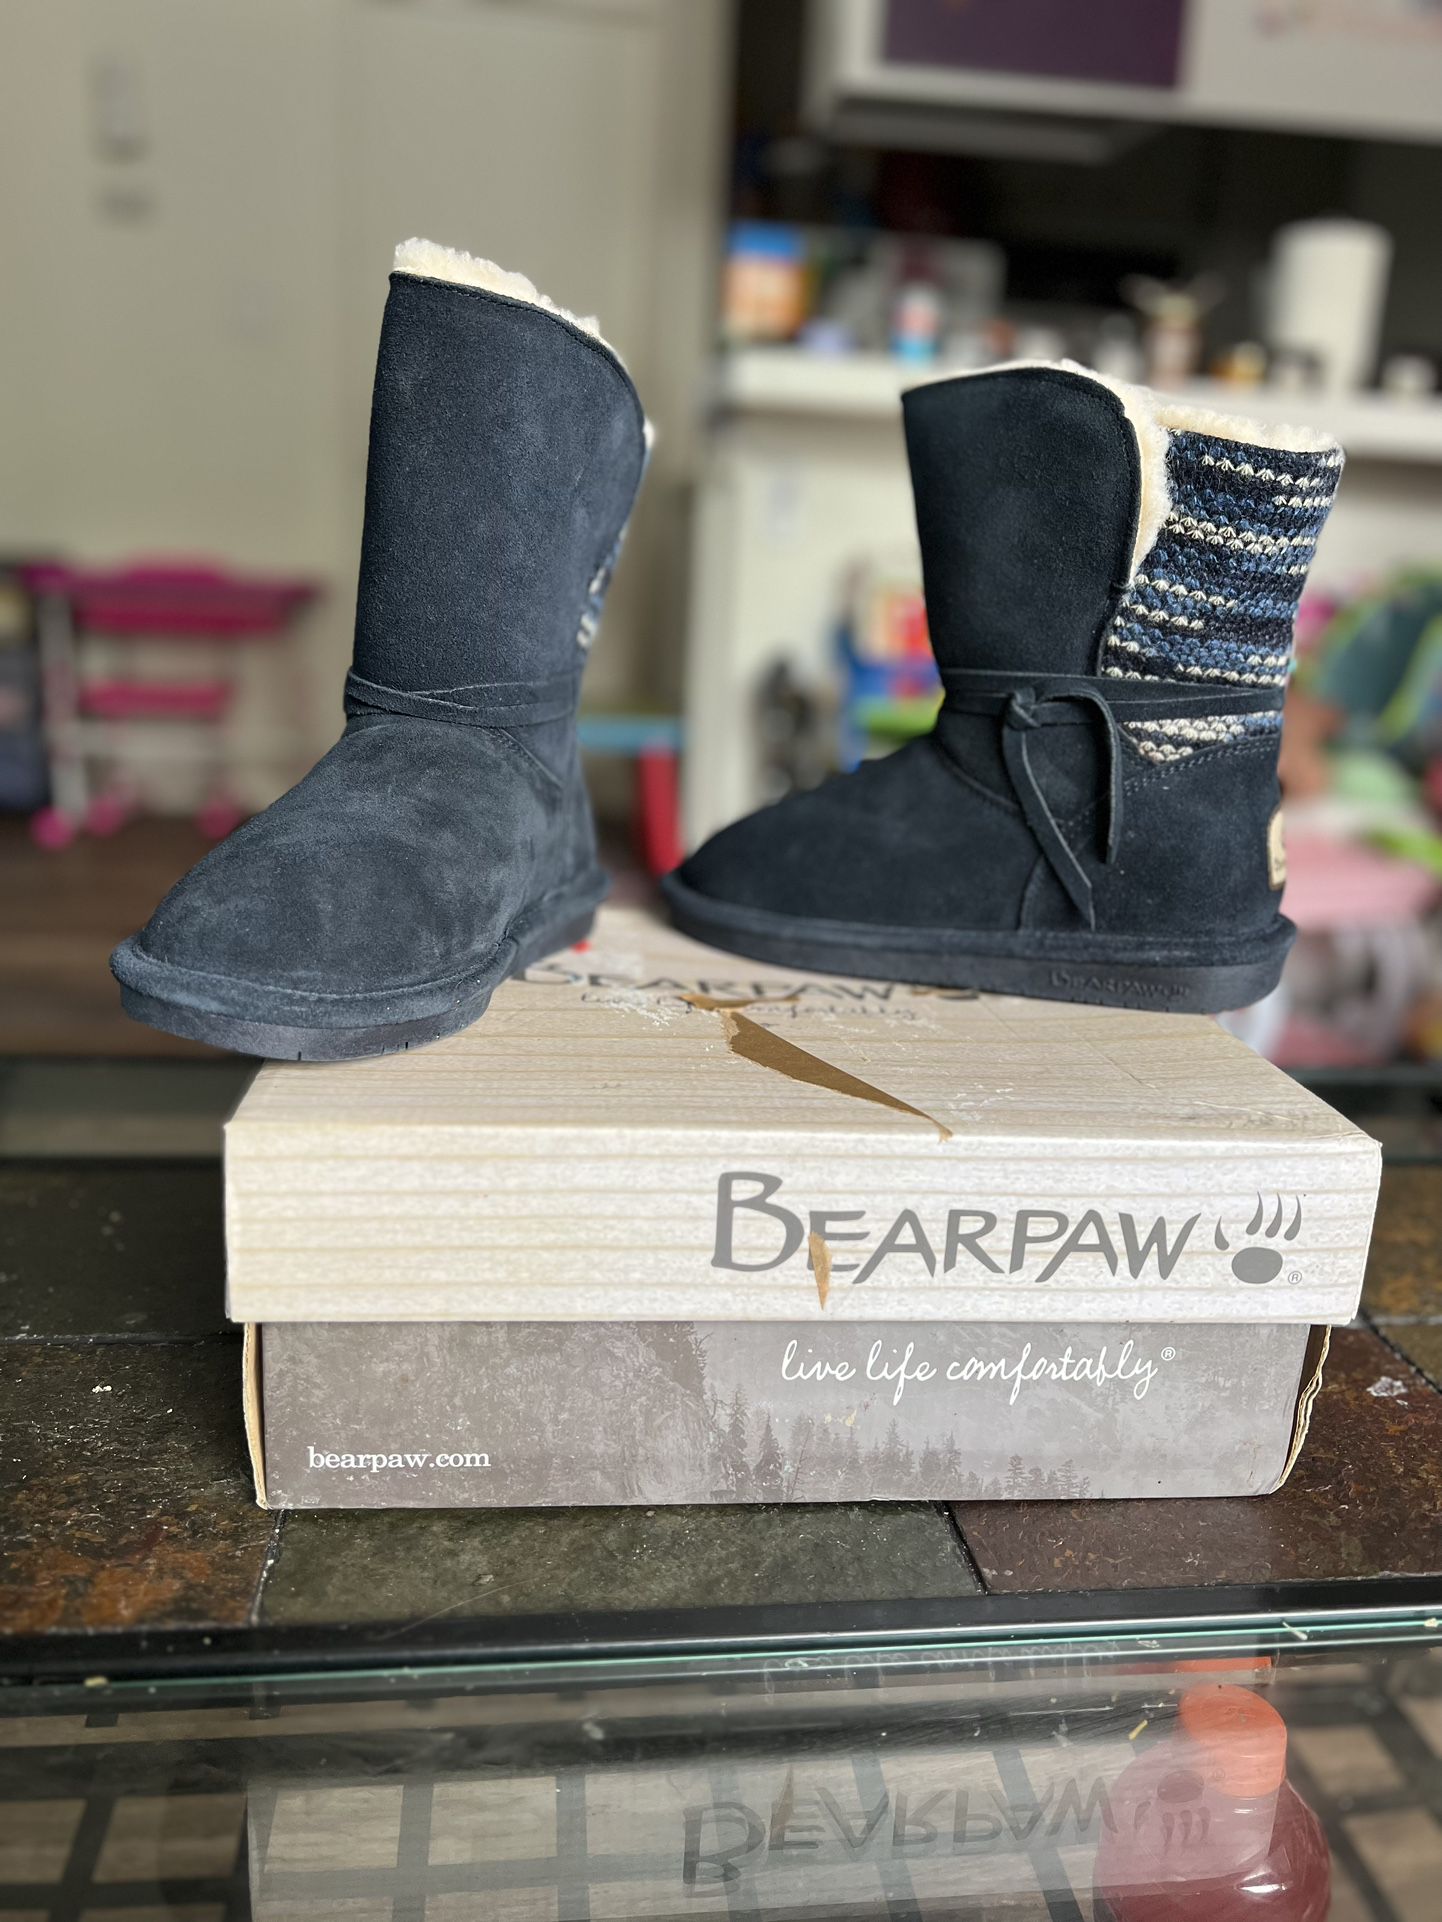 Paw Boots for Sale in Stockton, OfferUp